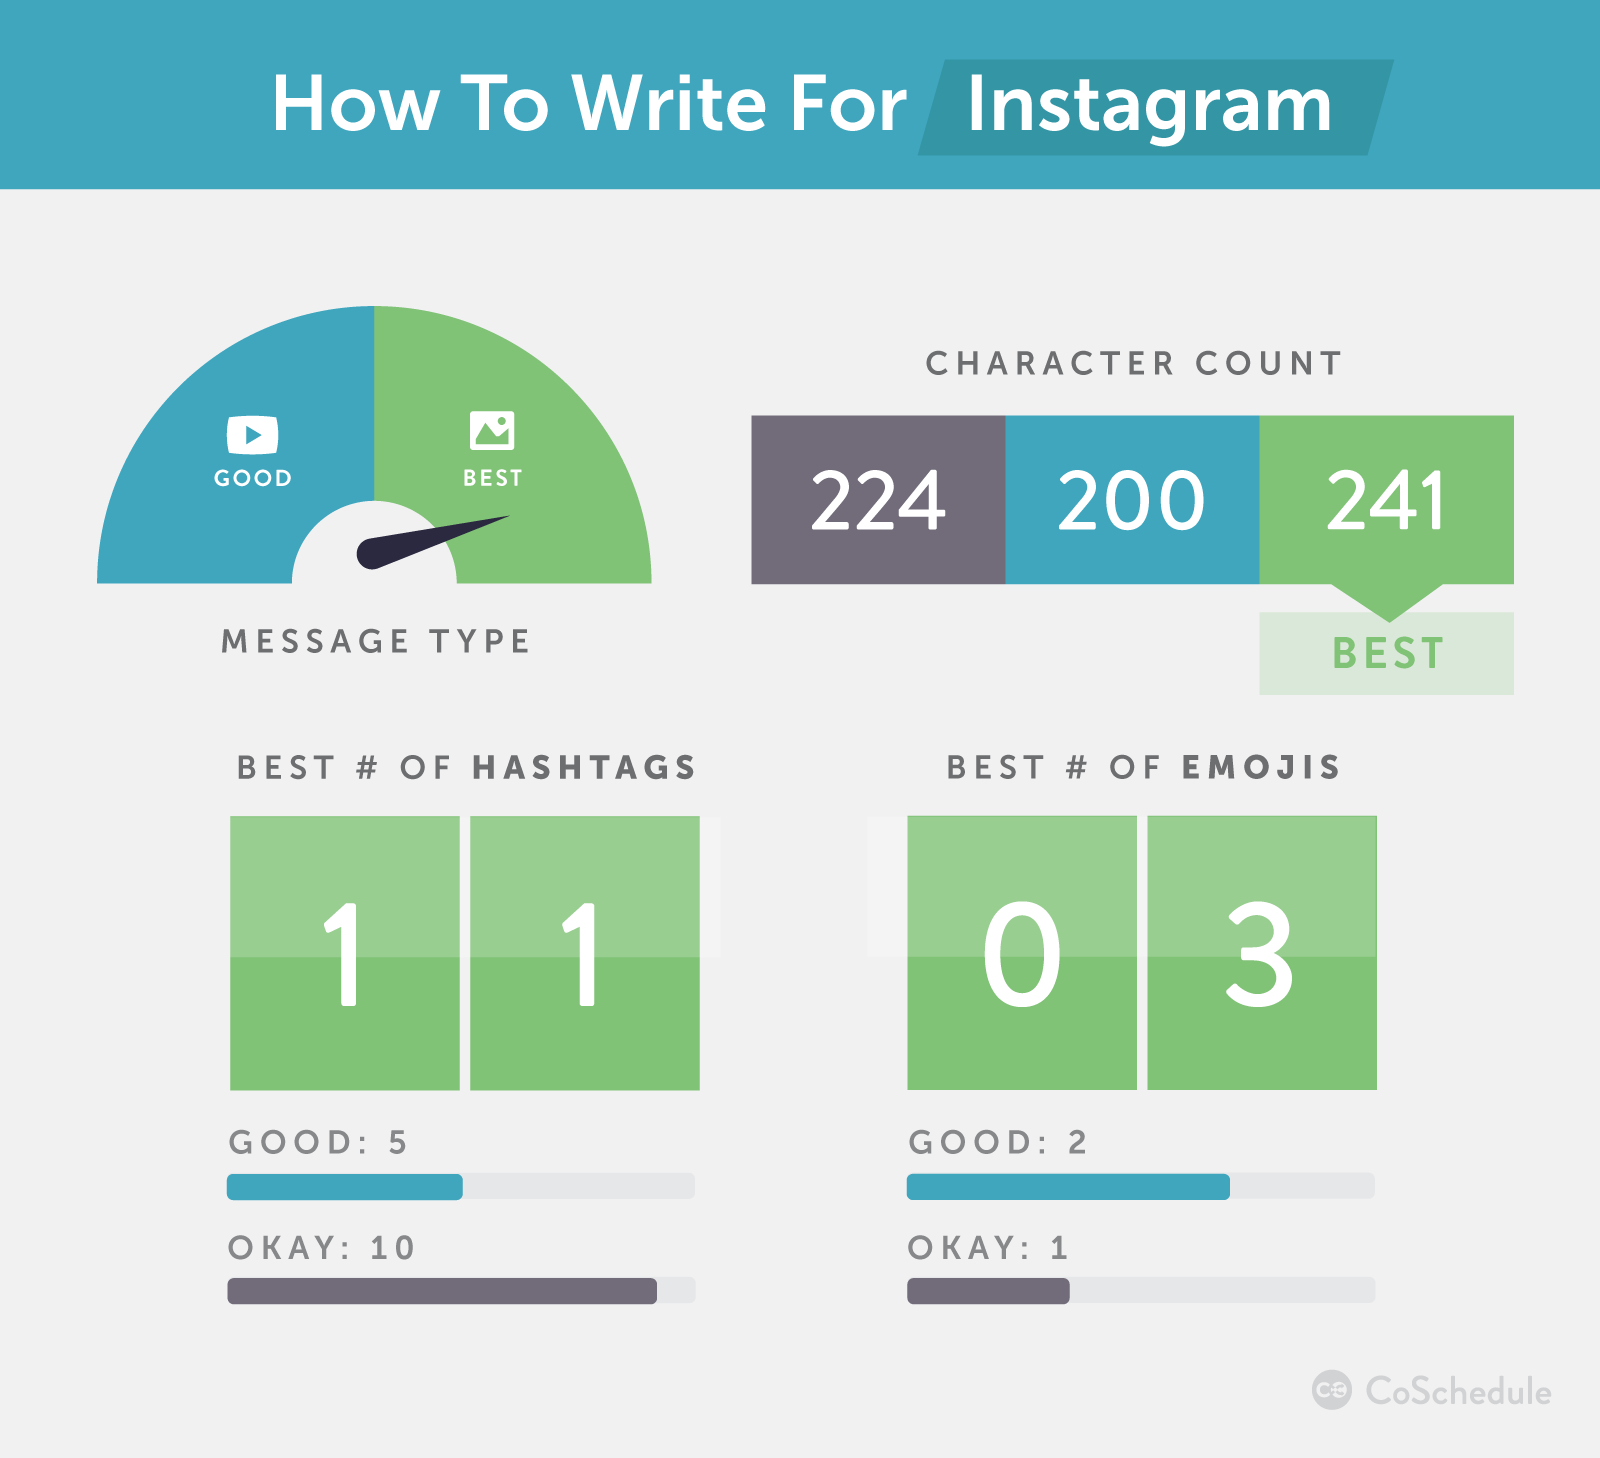 How to write for Instagram